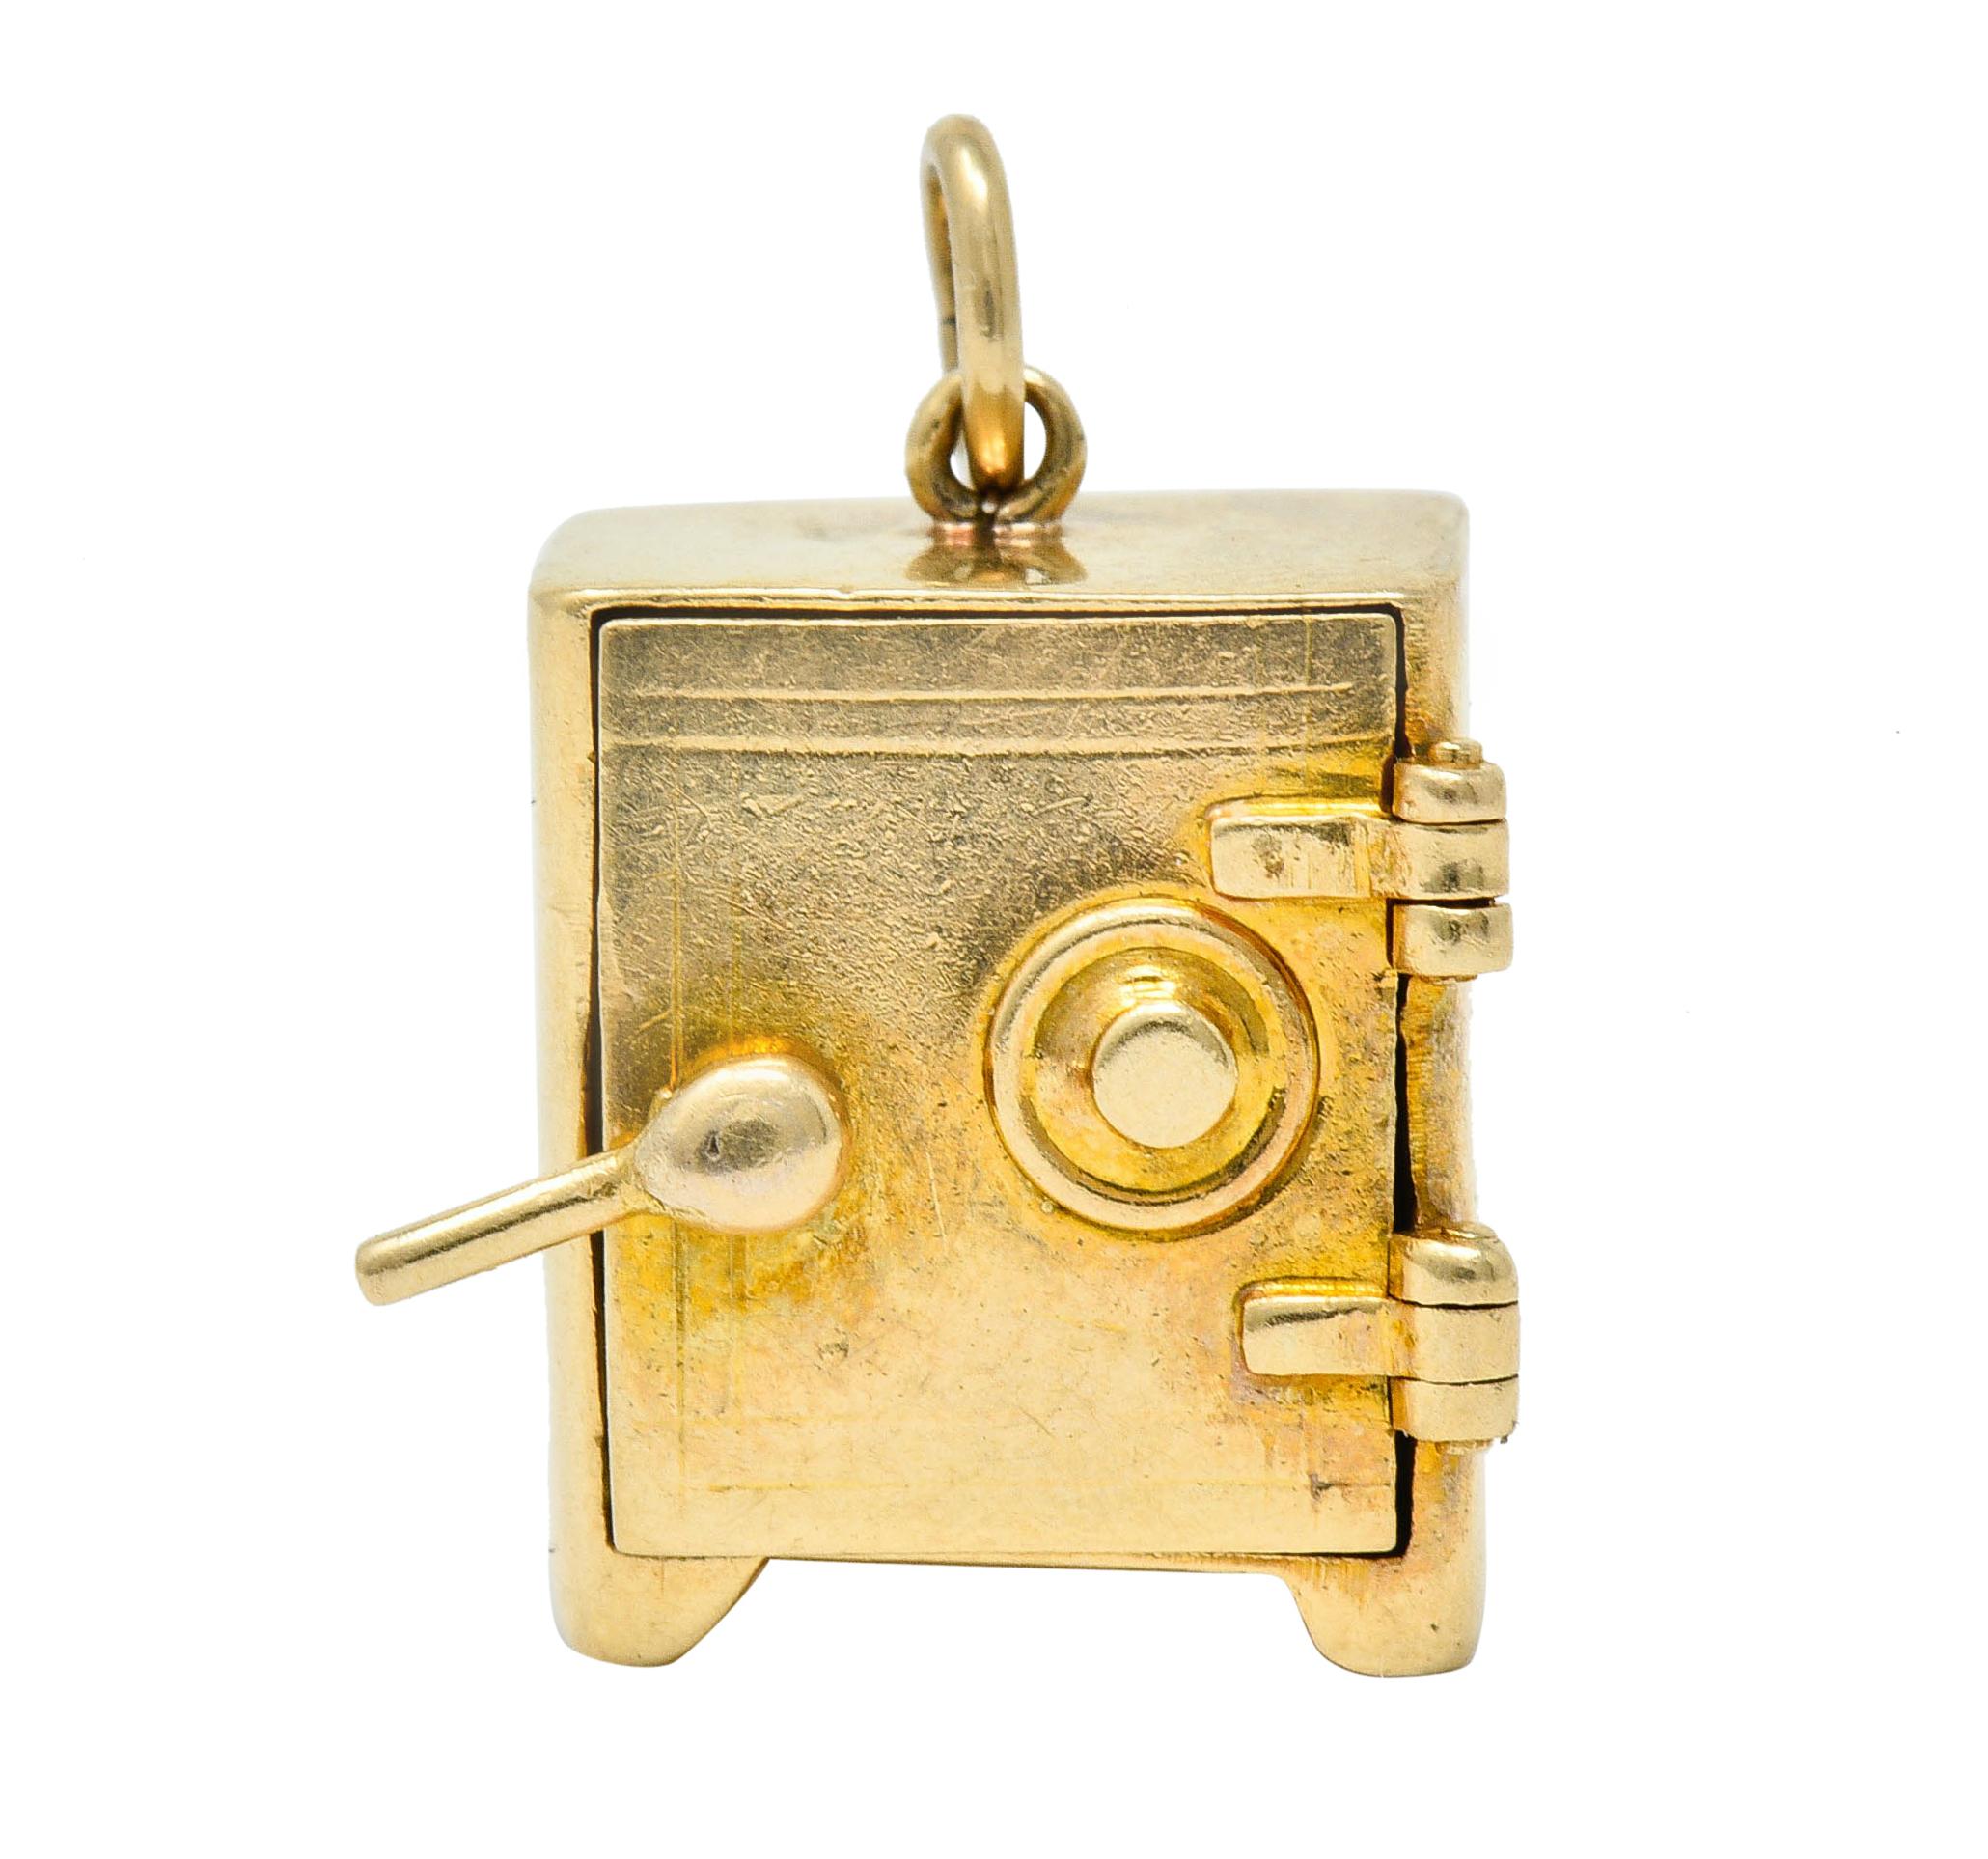 Designed as a safe with a functioning handle that pivots to unlock door

Door opens on a hinge to reveal a compactly folded dollar bill

Completed by a jump ring bale

Stamped 14K for 14 karat gold

Measures: 7/16 x 3/4 inch (including bale)

Total